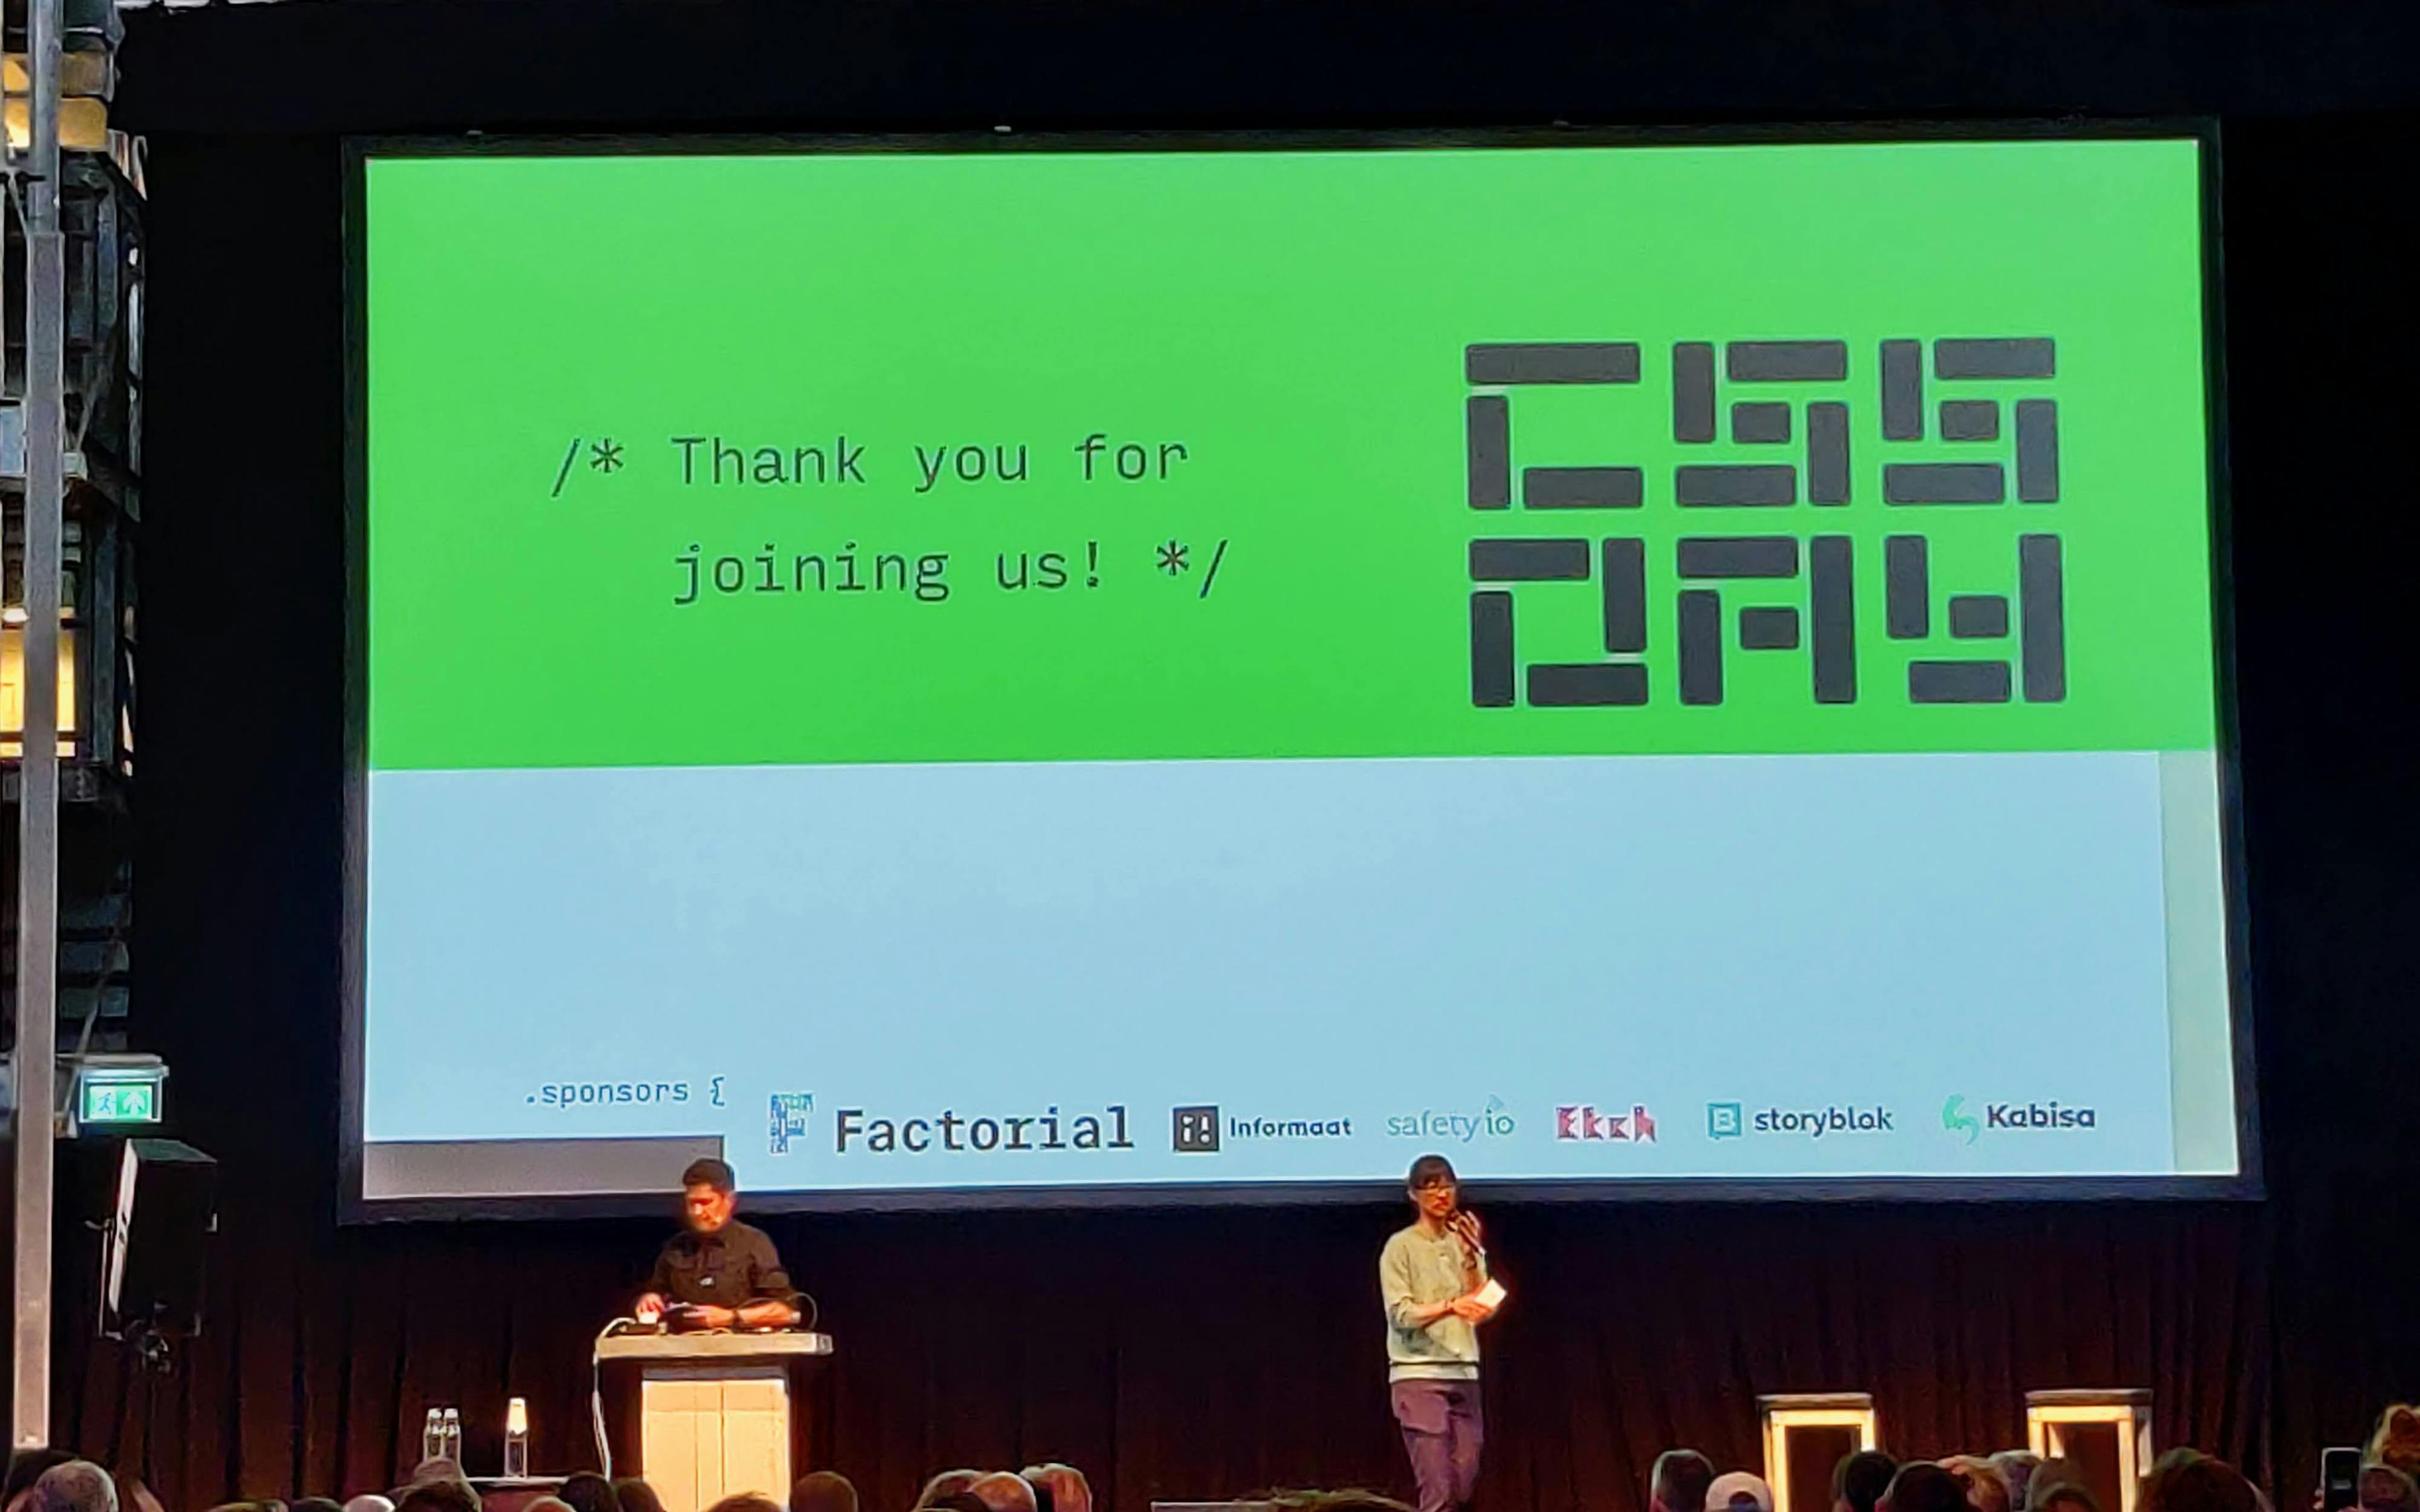 The end of css day